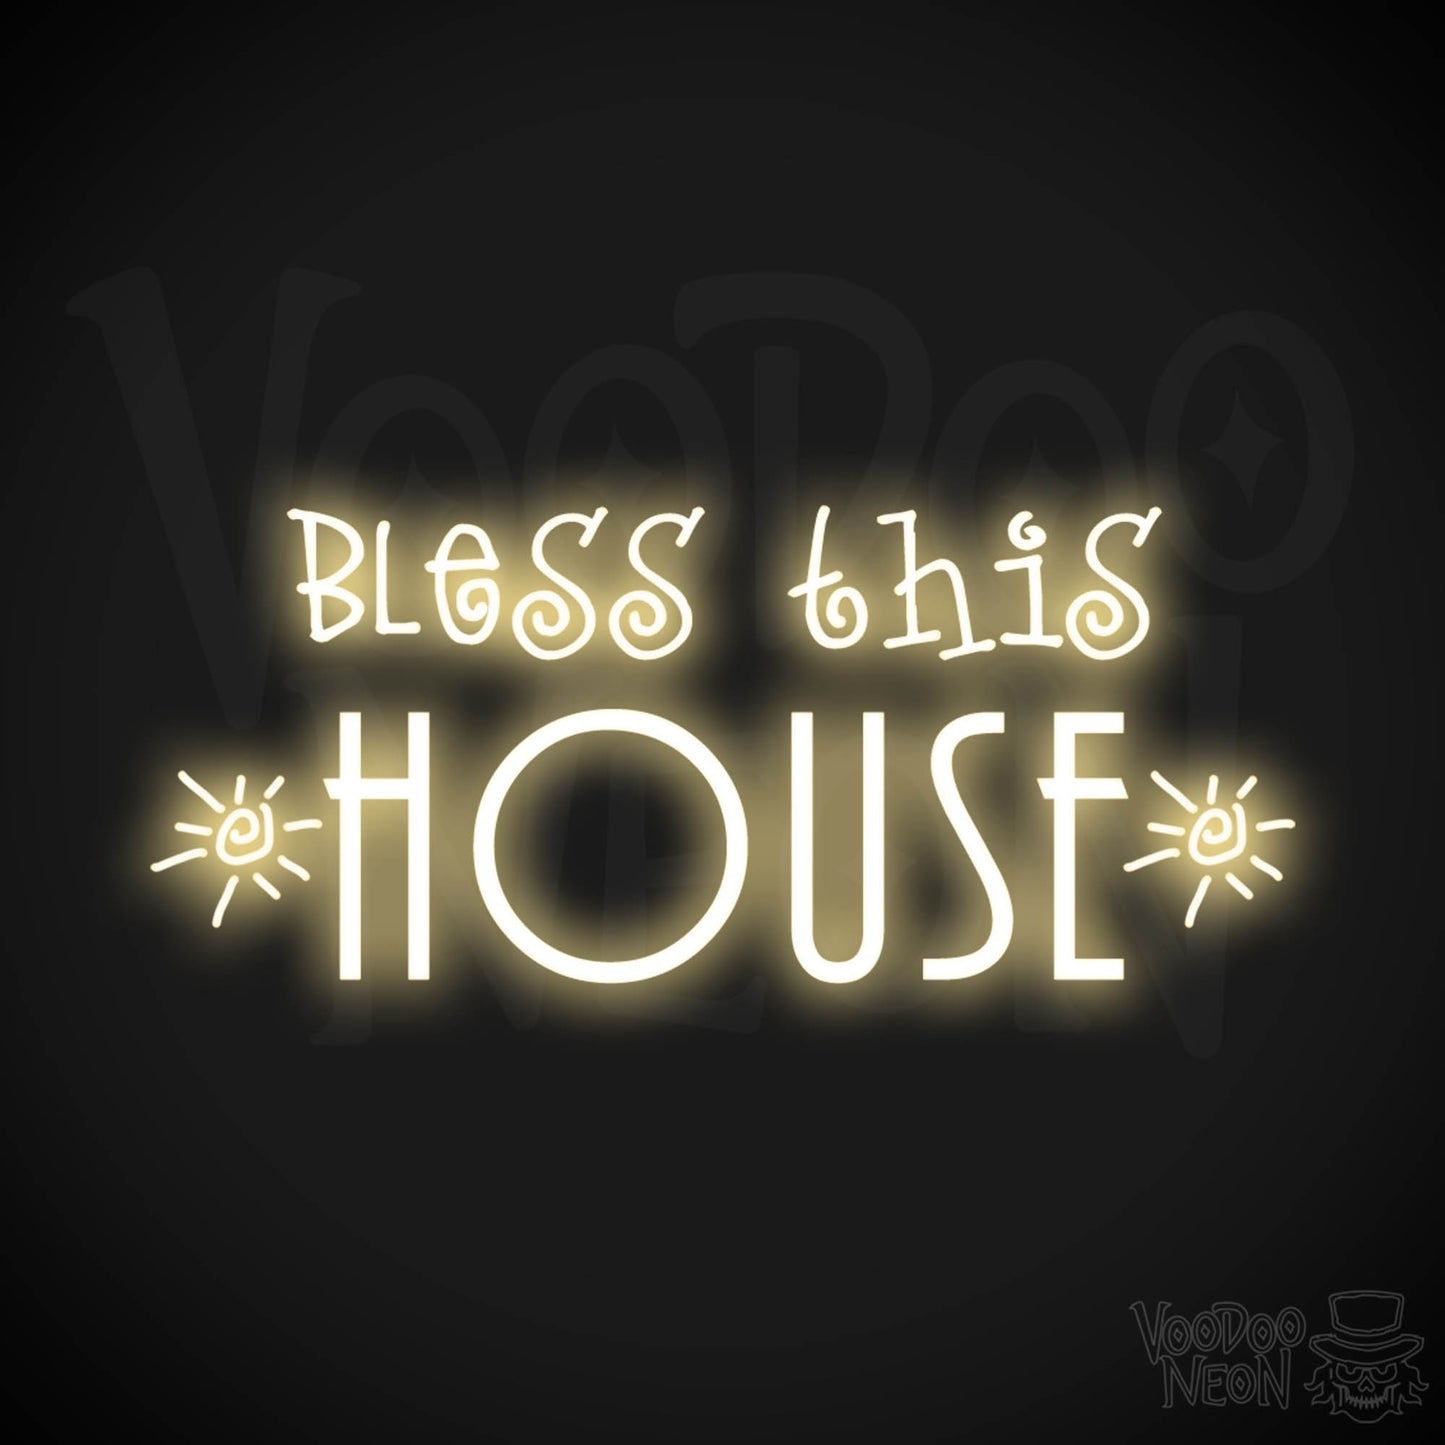 Bless This House Neon Sign - Neon Bless This House Sign - LED Light Up Sign - Color Warm White